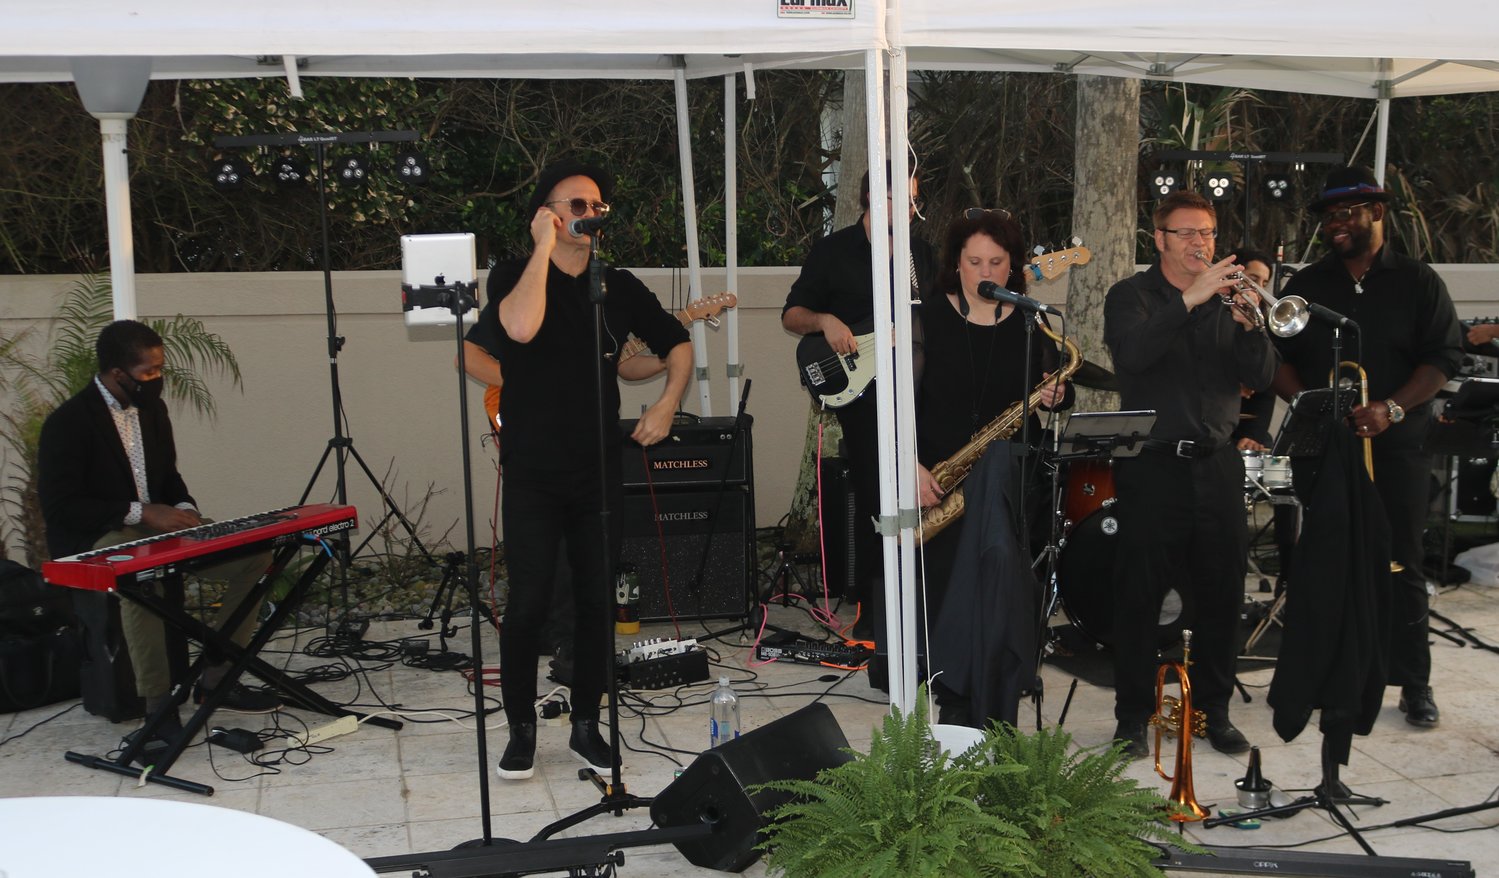 The Chris Thomas Band performed at the inaugural Rolls Royce Players Party on Friday, March 12.